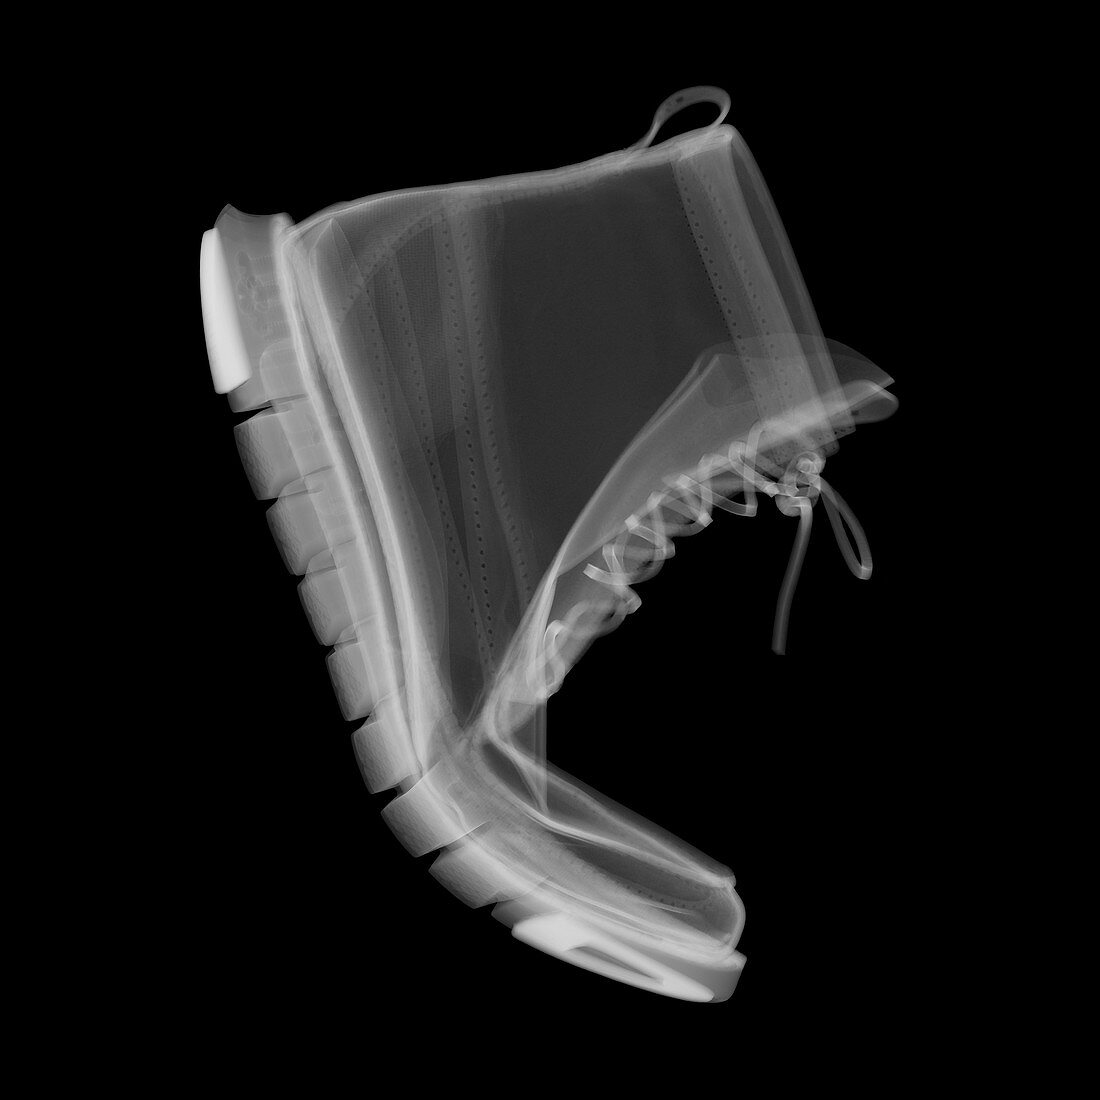 Flexing boot, X-ray